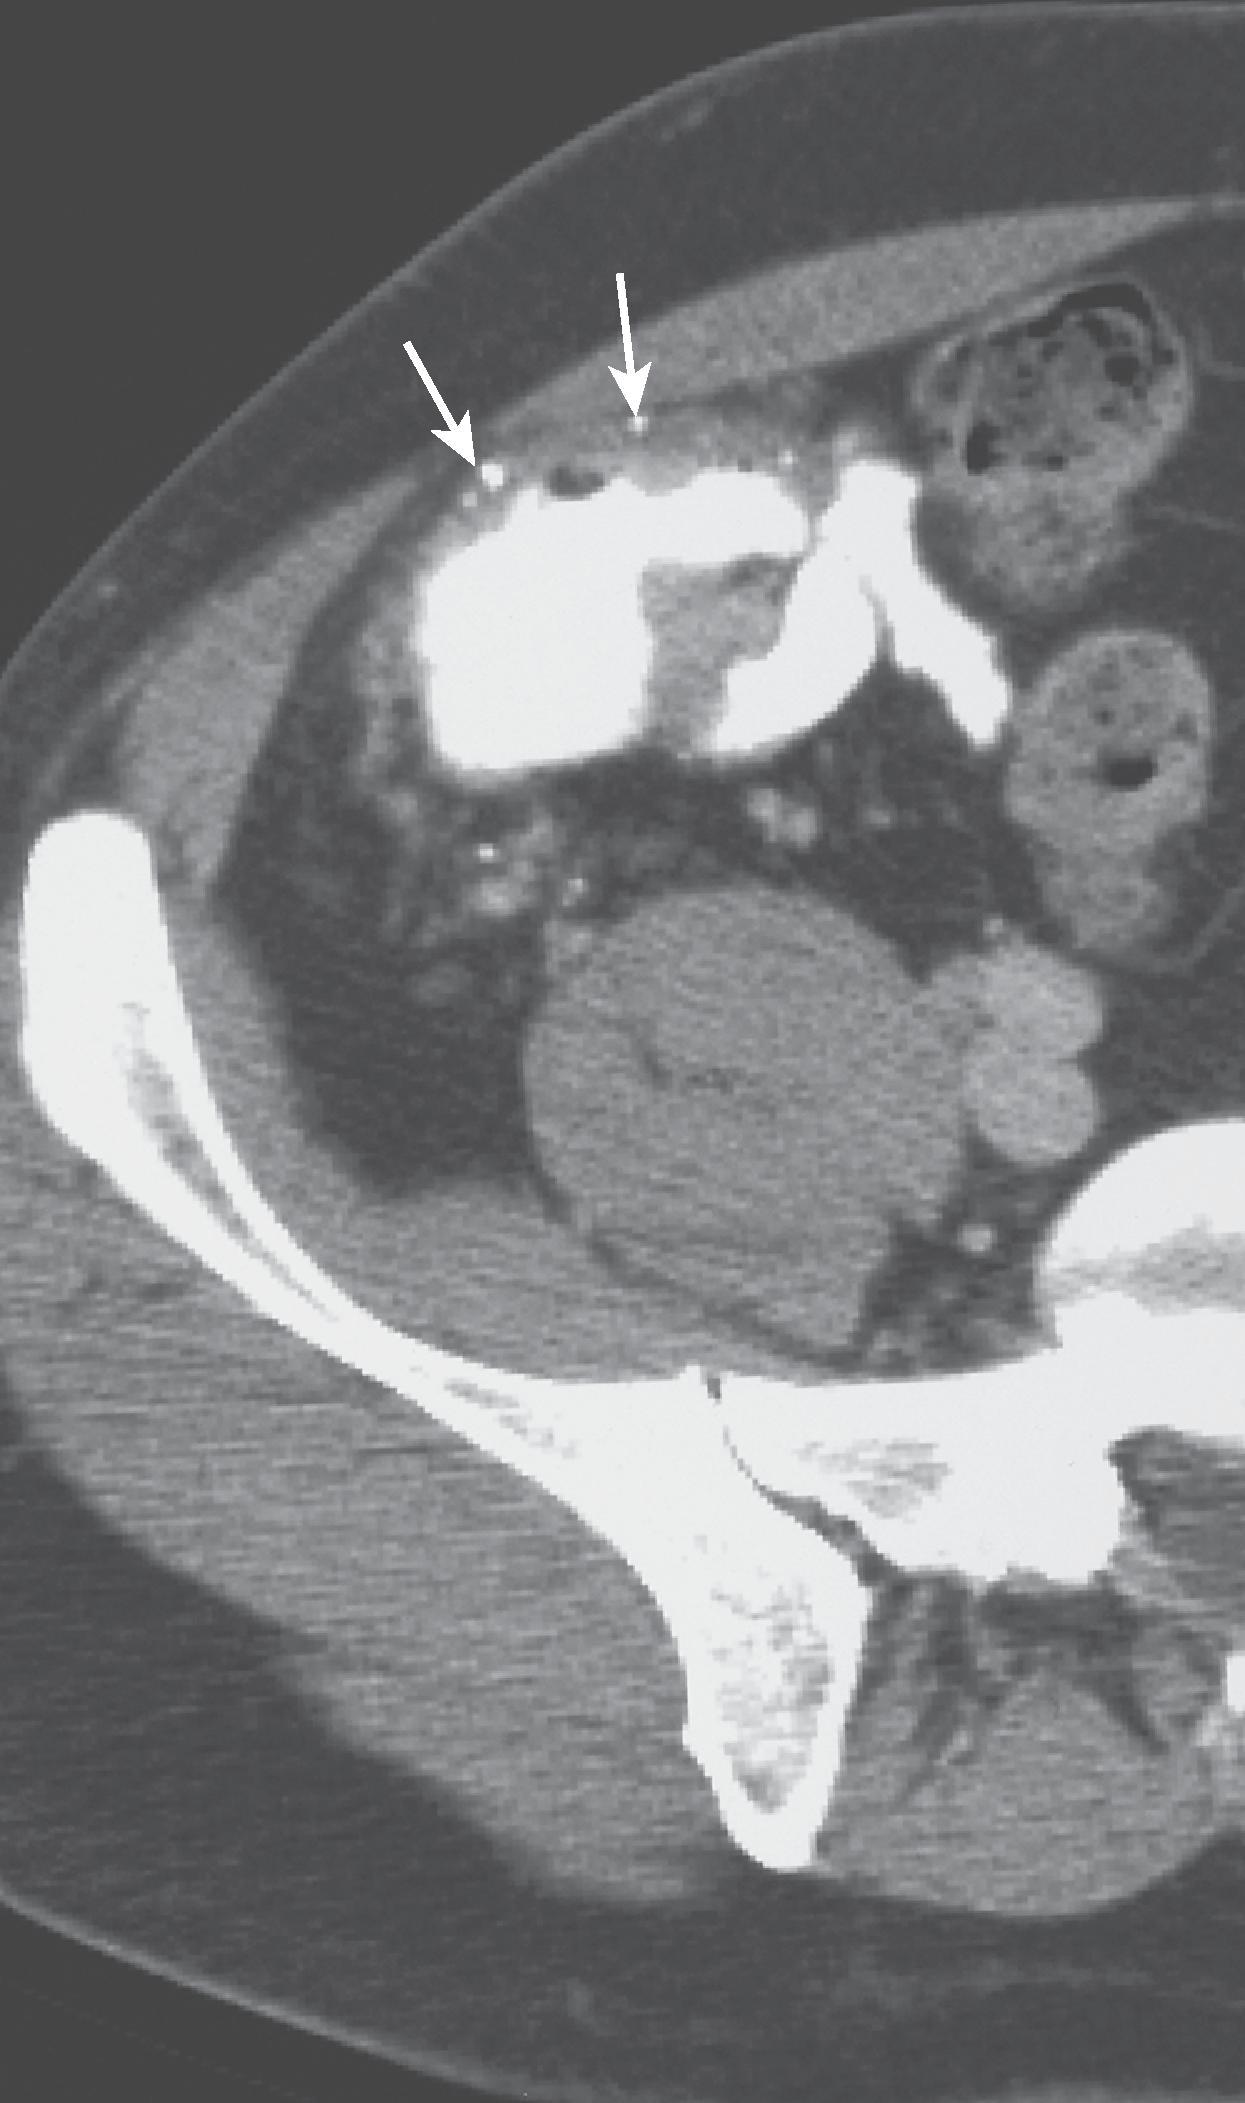 Fig. 44.2, Hemangioma of the colon. Computed tomography scan shows lobulated thickening of the circumference of the wall of the cecum with numerous calcified phleboliths (arrows) in the subserosa.